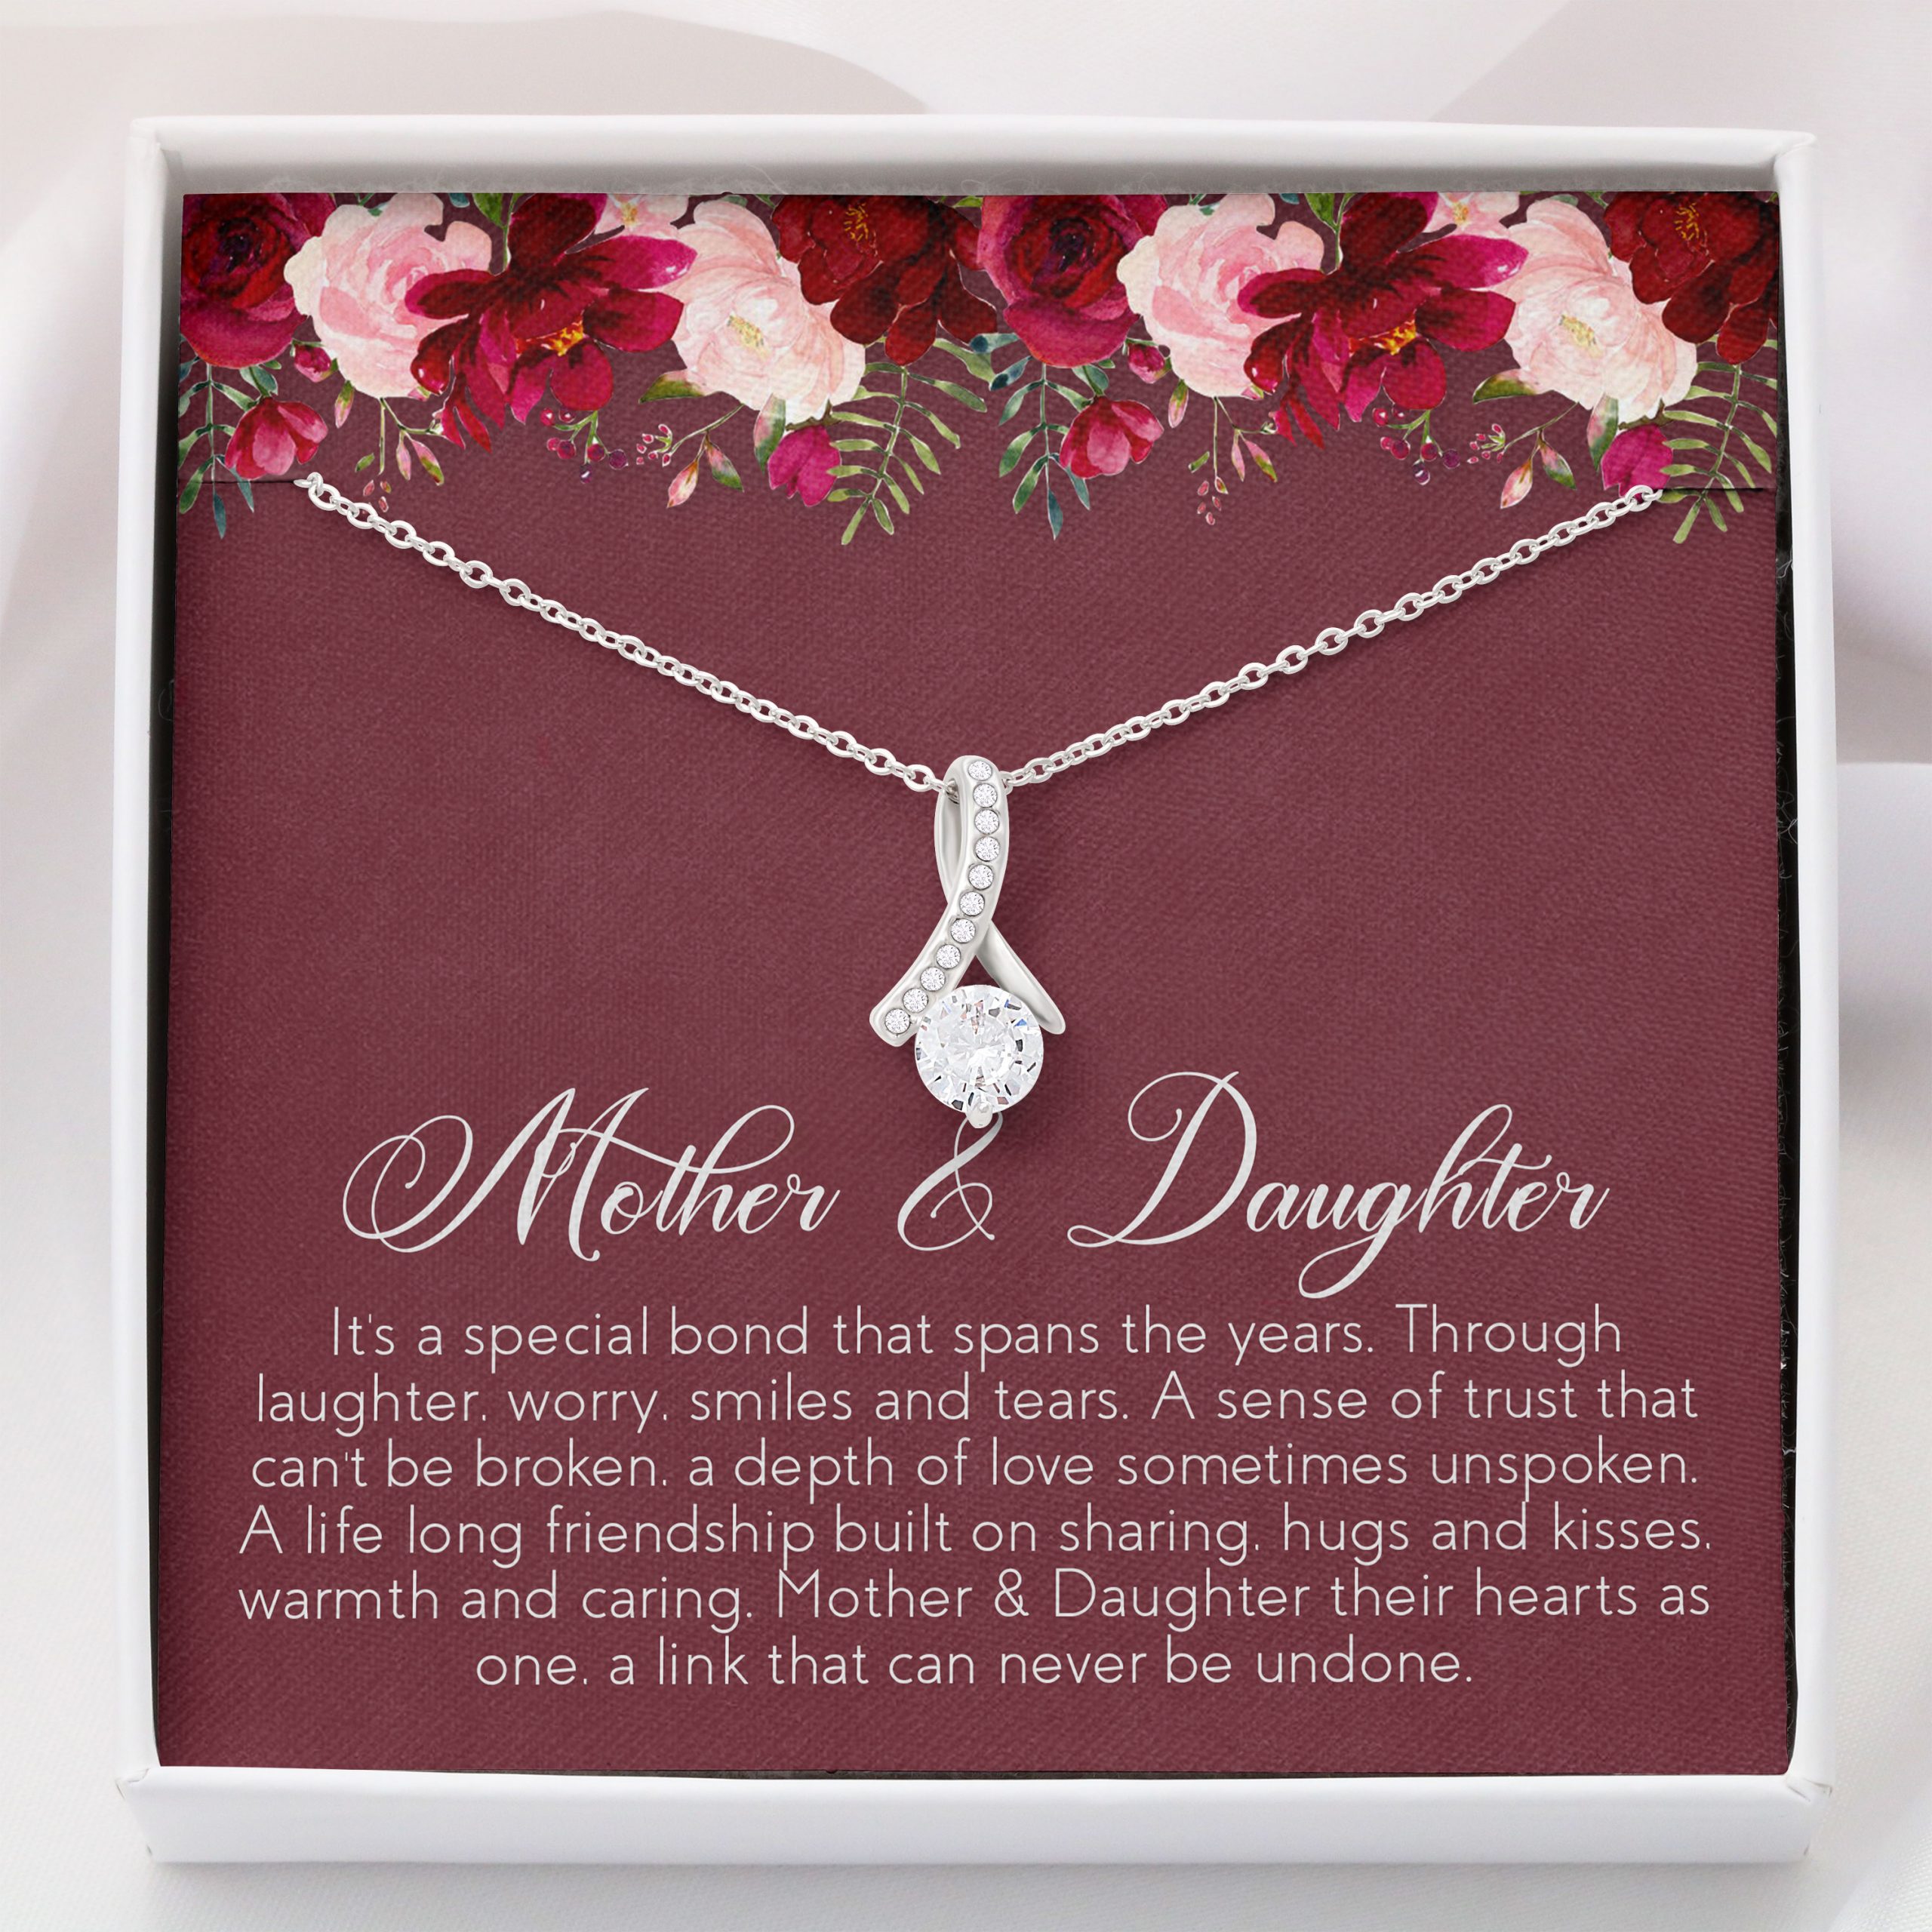 https://homewix.com/wp-content/uploads/2021/04/2021-04-Mother-And-Daughter-Alluring-Beauty-Necklace-BT170-Mockup1-scaled.jpeg